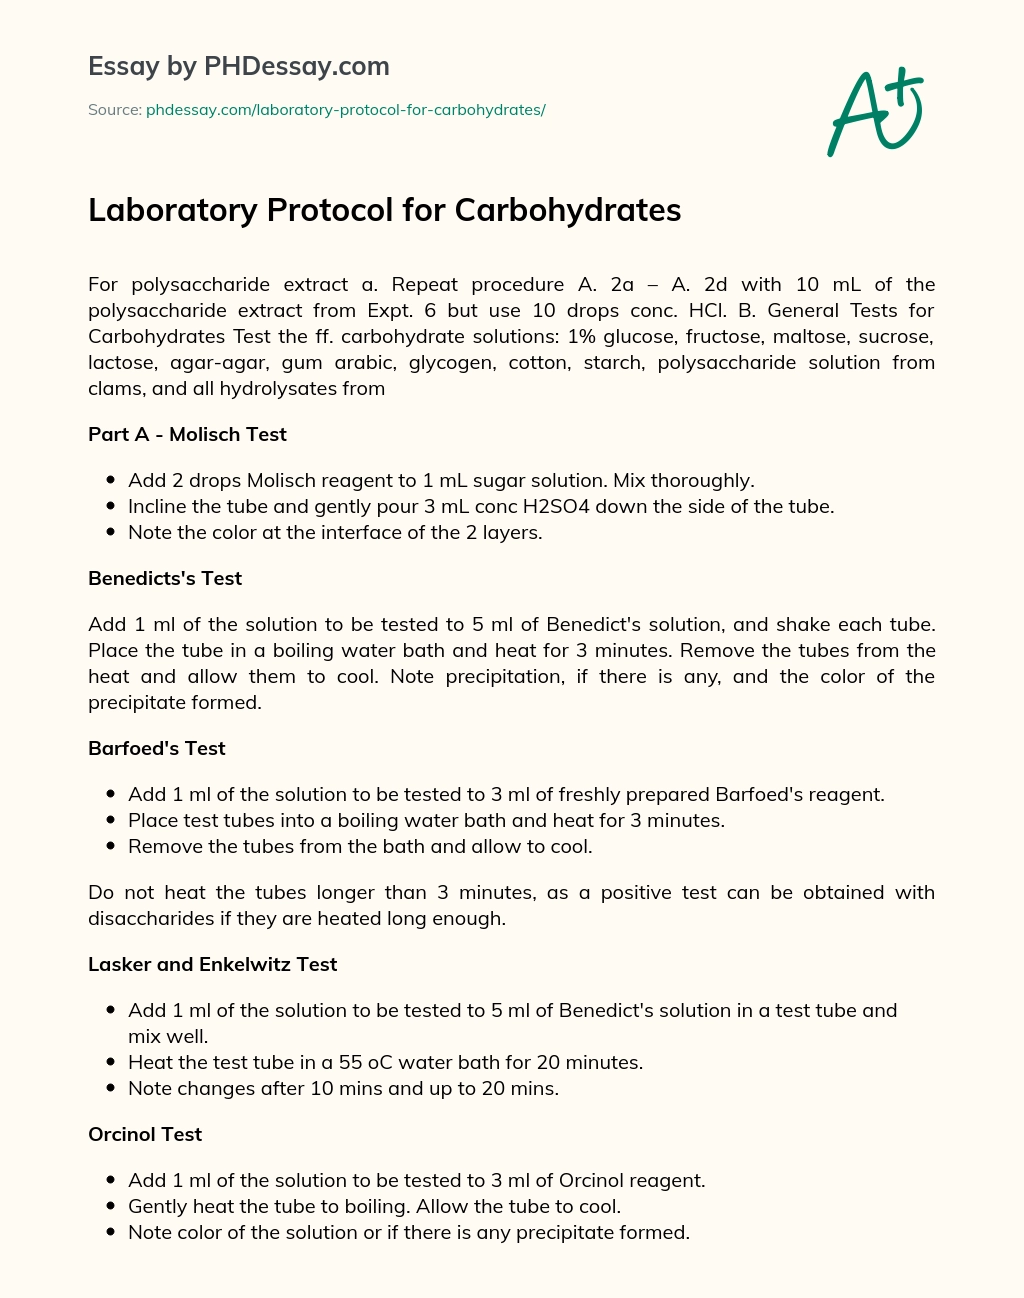 Laboratory Protocol for Carbohydrates essay